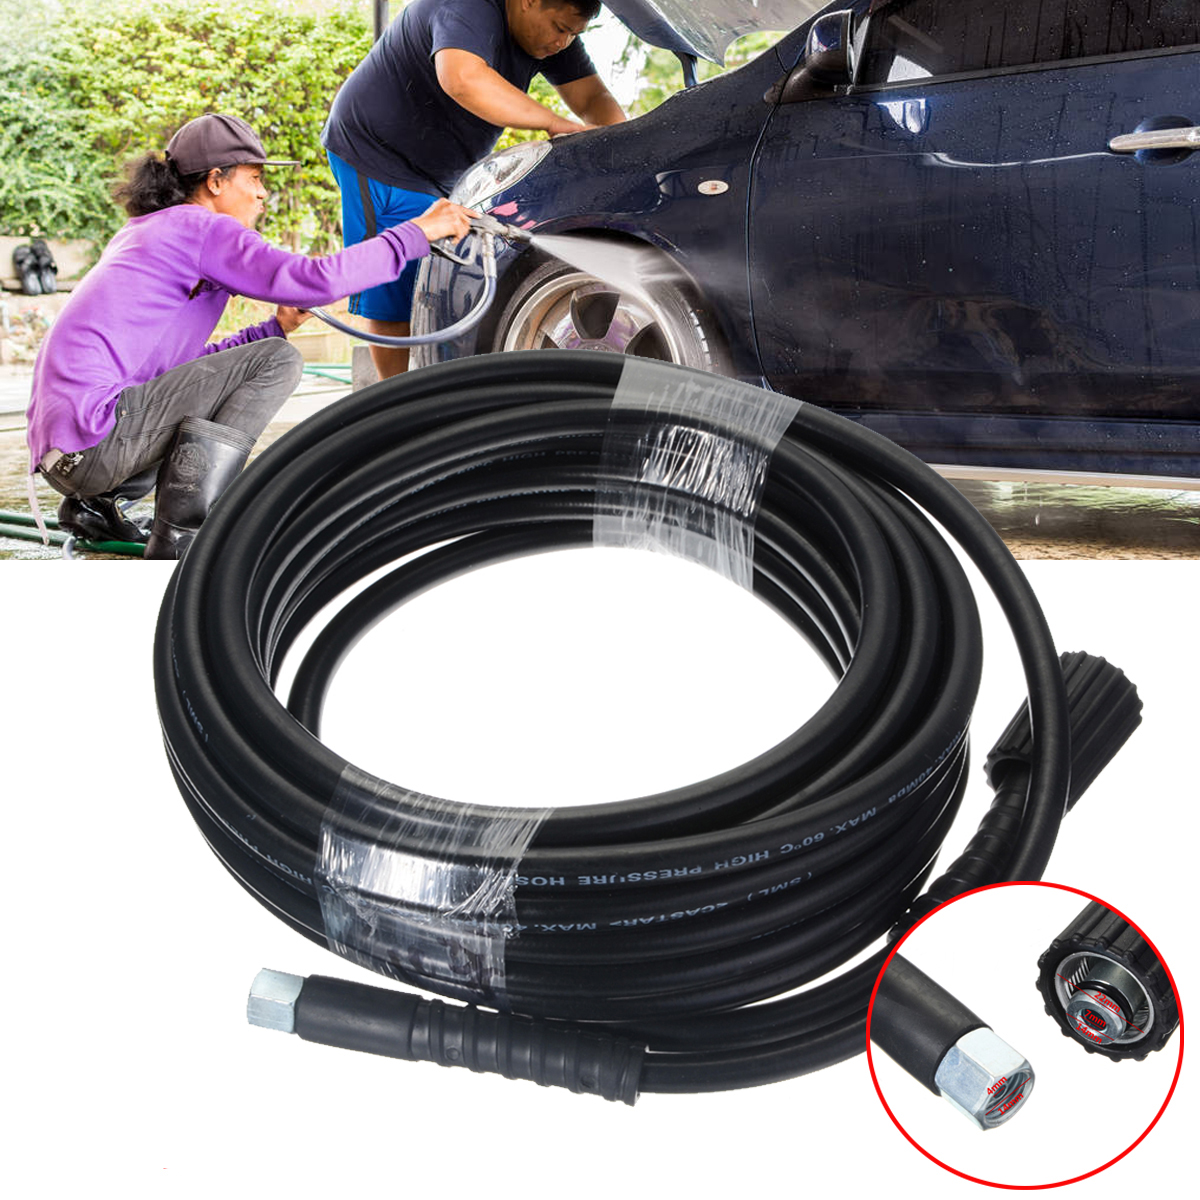 

30ft 10M 5800PSI High Power Pressure Washer Extension Jet Hose Water Pipe M22 X M14 Thread